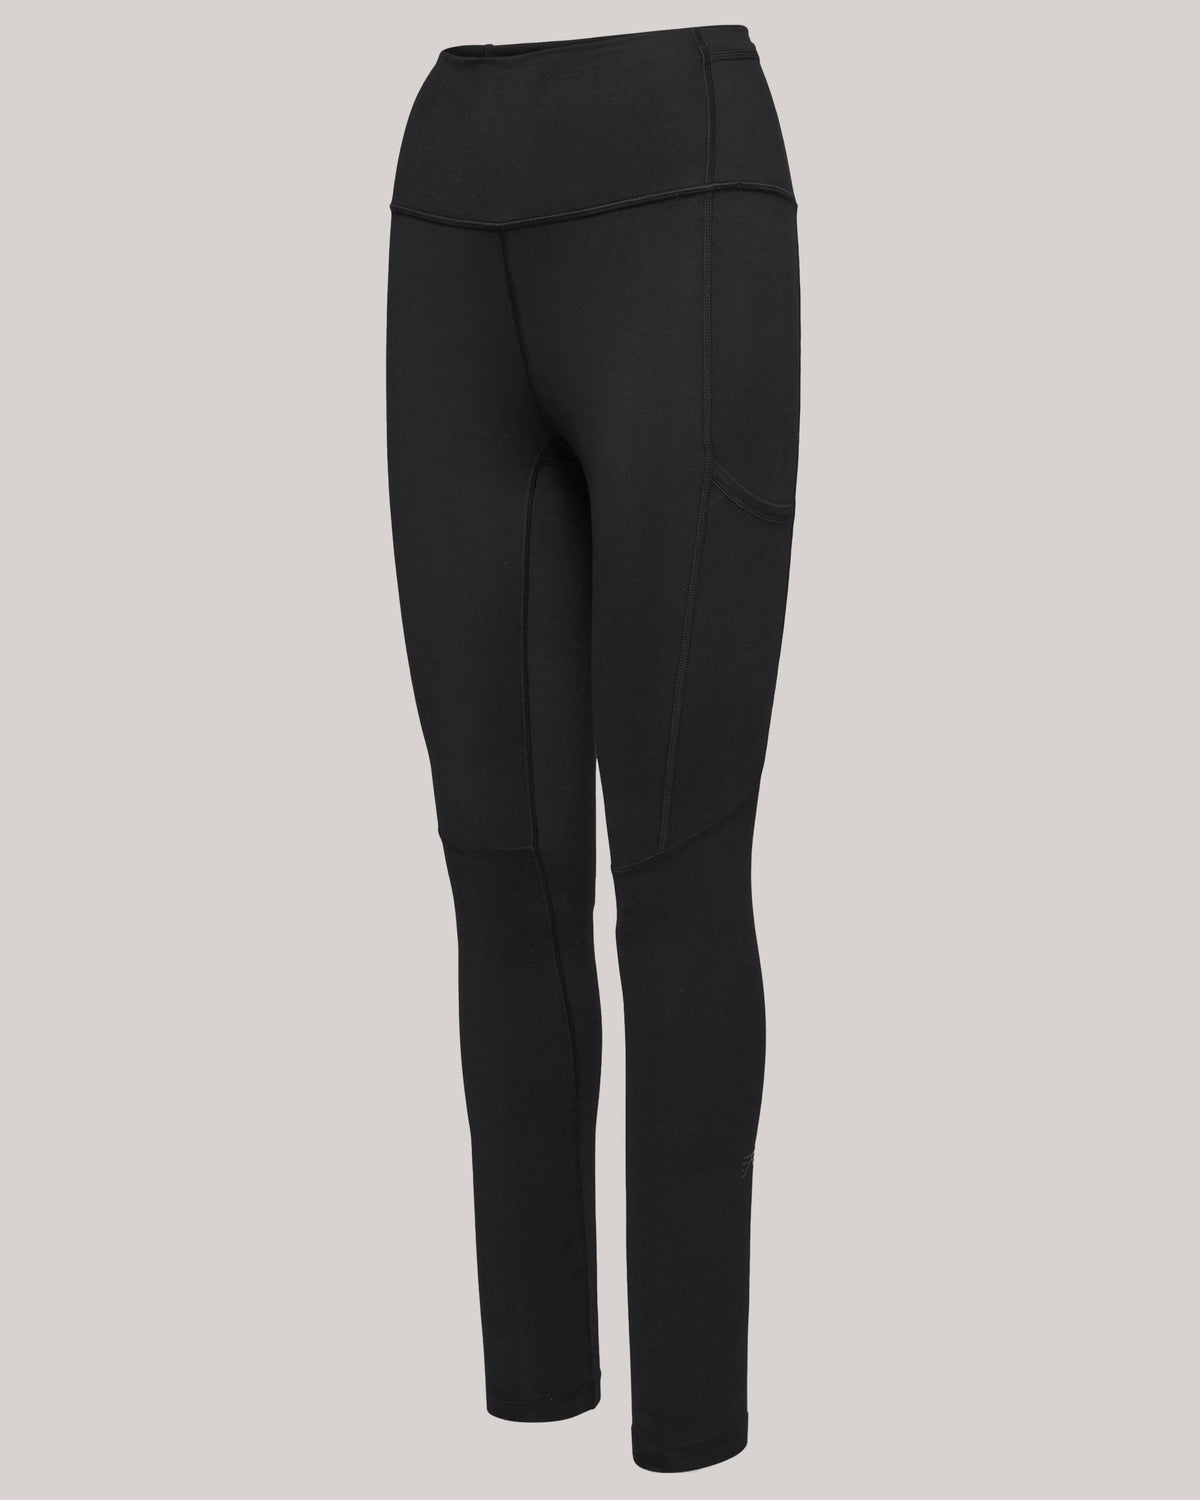 Modern Anti Pilling Womens Leather Leggins Leggings With Cross Bandage And  Hip Lifting From Matthewaw, $12.45